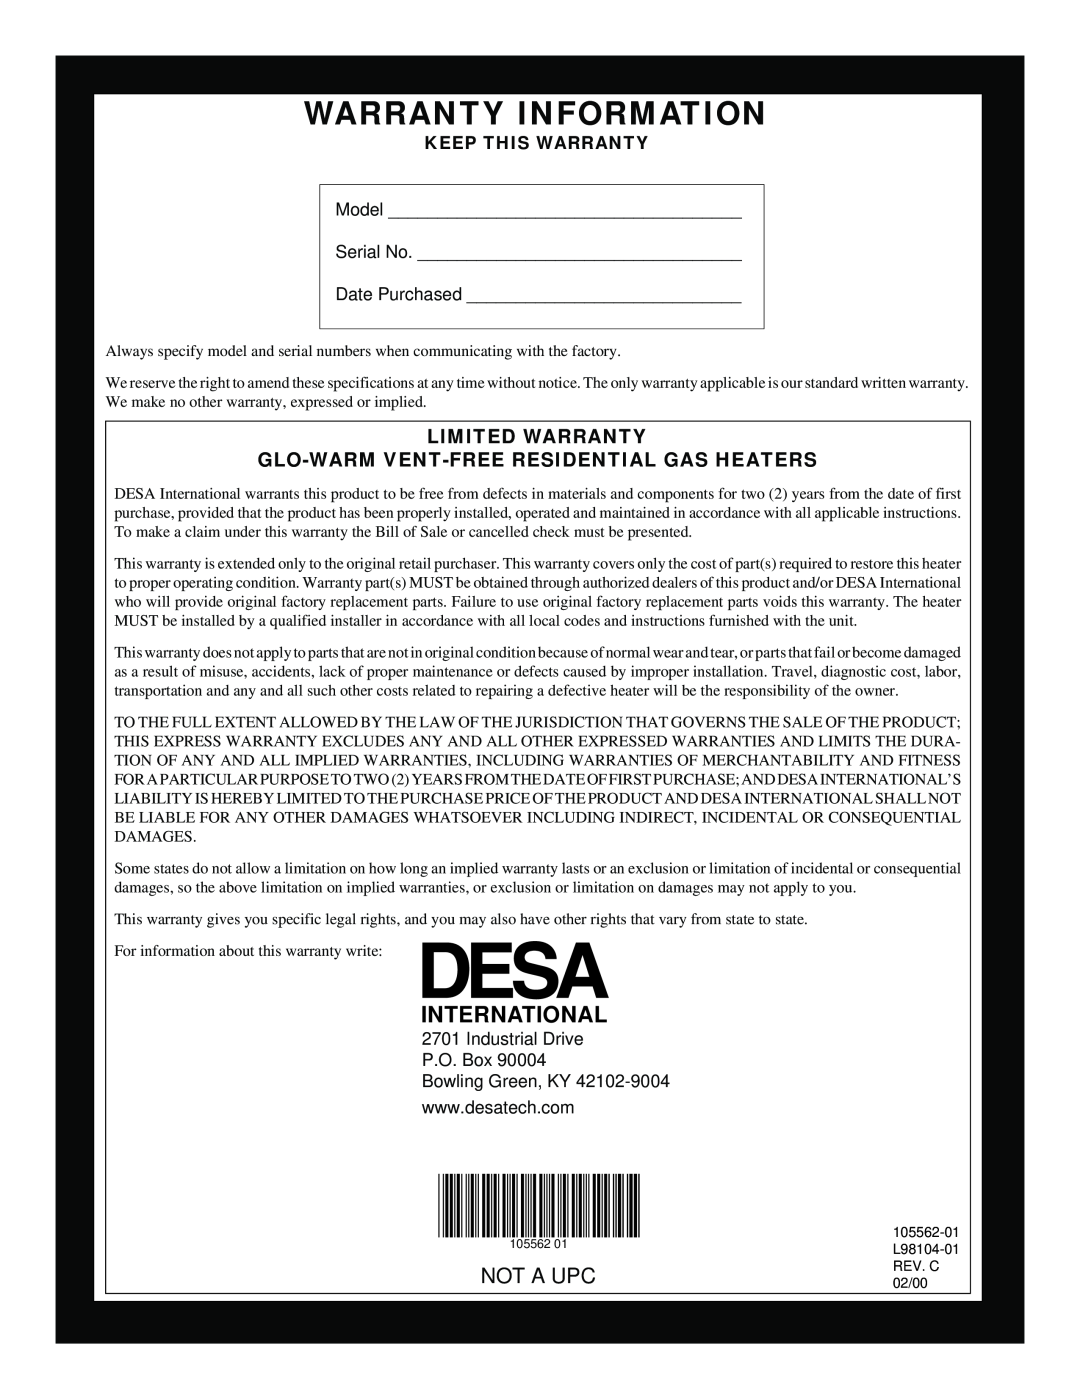 Desa FA-2B Warranty Information, International, Not A Upc, Keep This Warranty, Model Serial No Date Purchased 